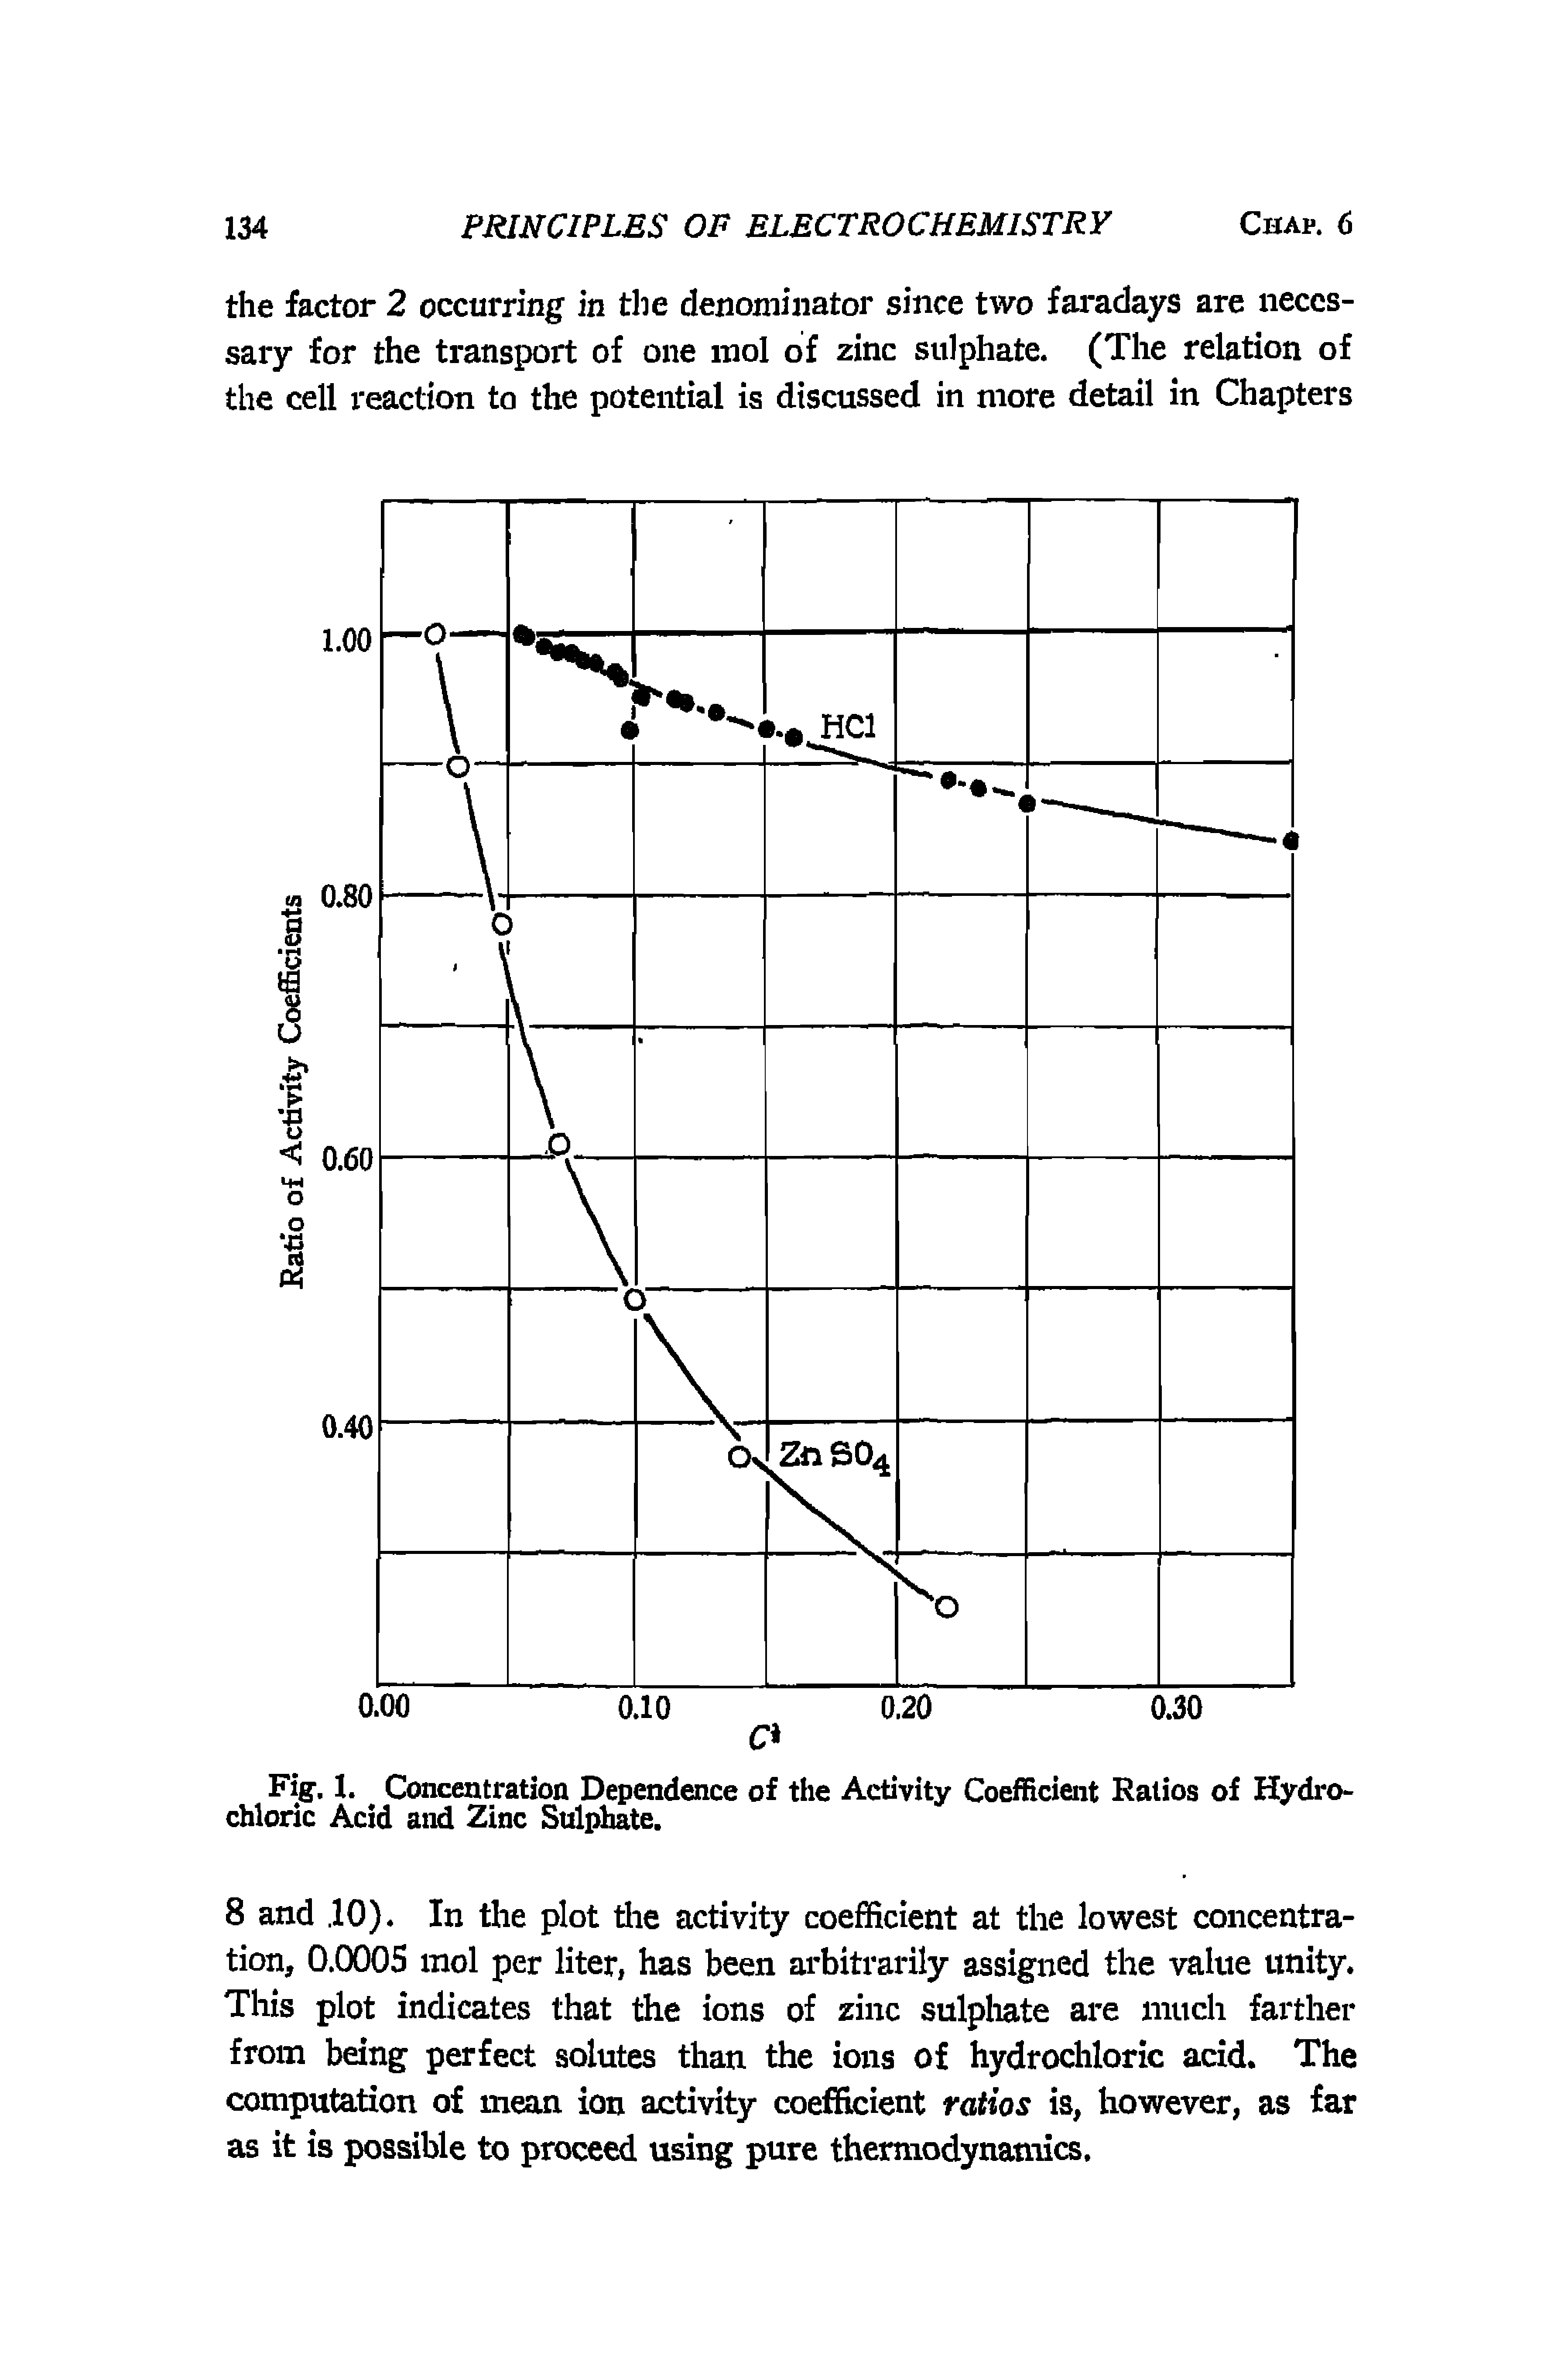 Fig. 1. Concentration Dependence of the Activity Coefficient Ratios of Hydrochloric Acid and Zinc Sulphate.